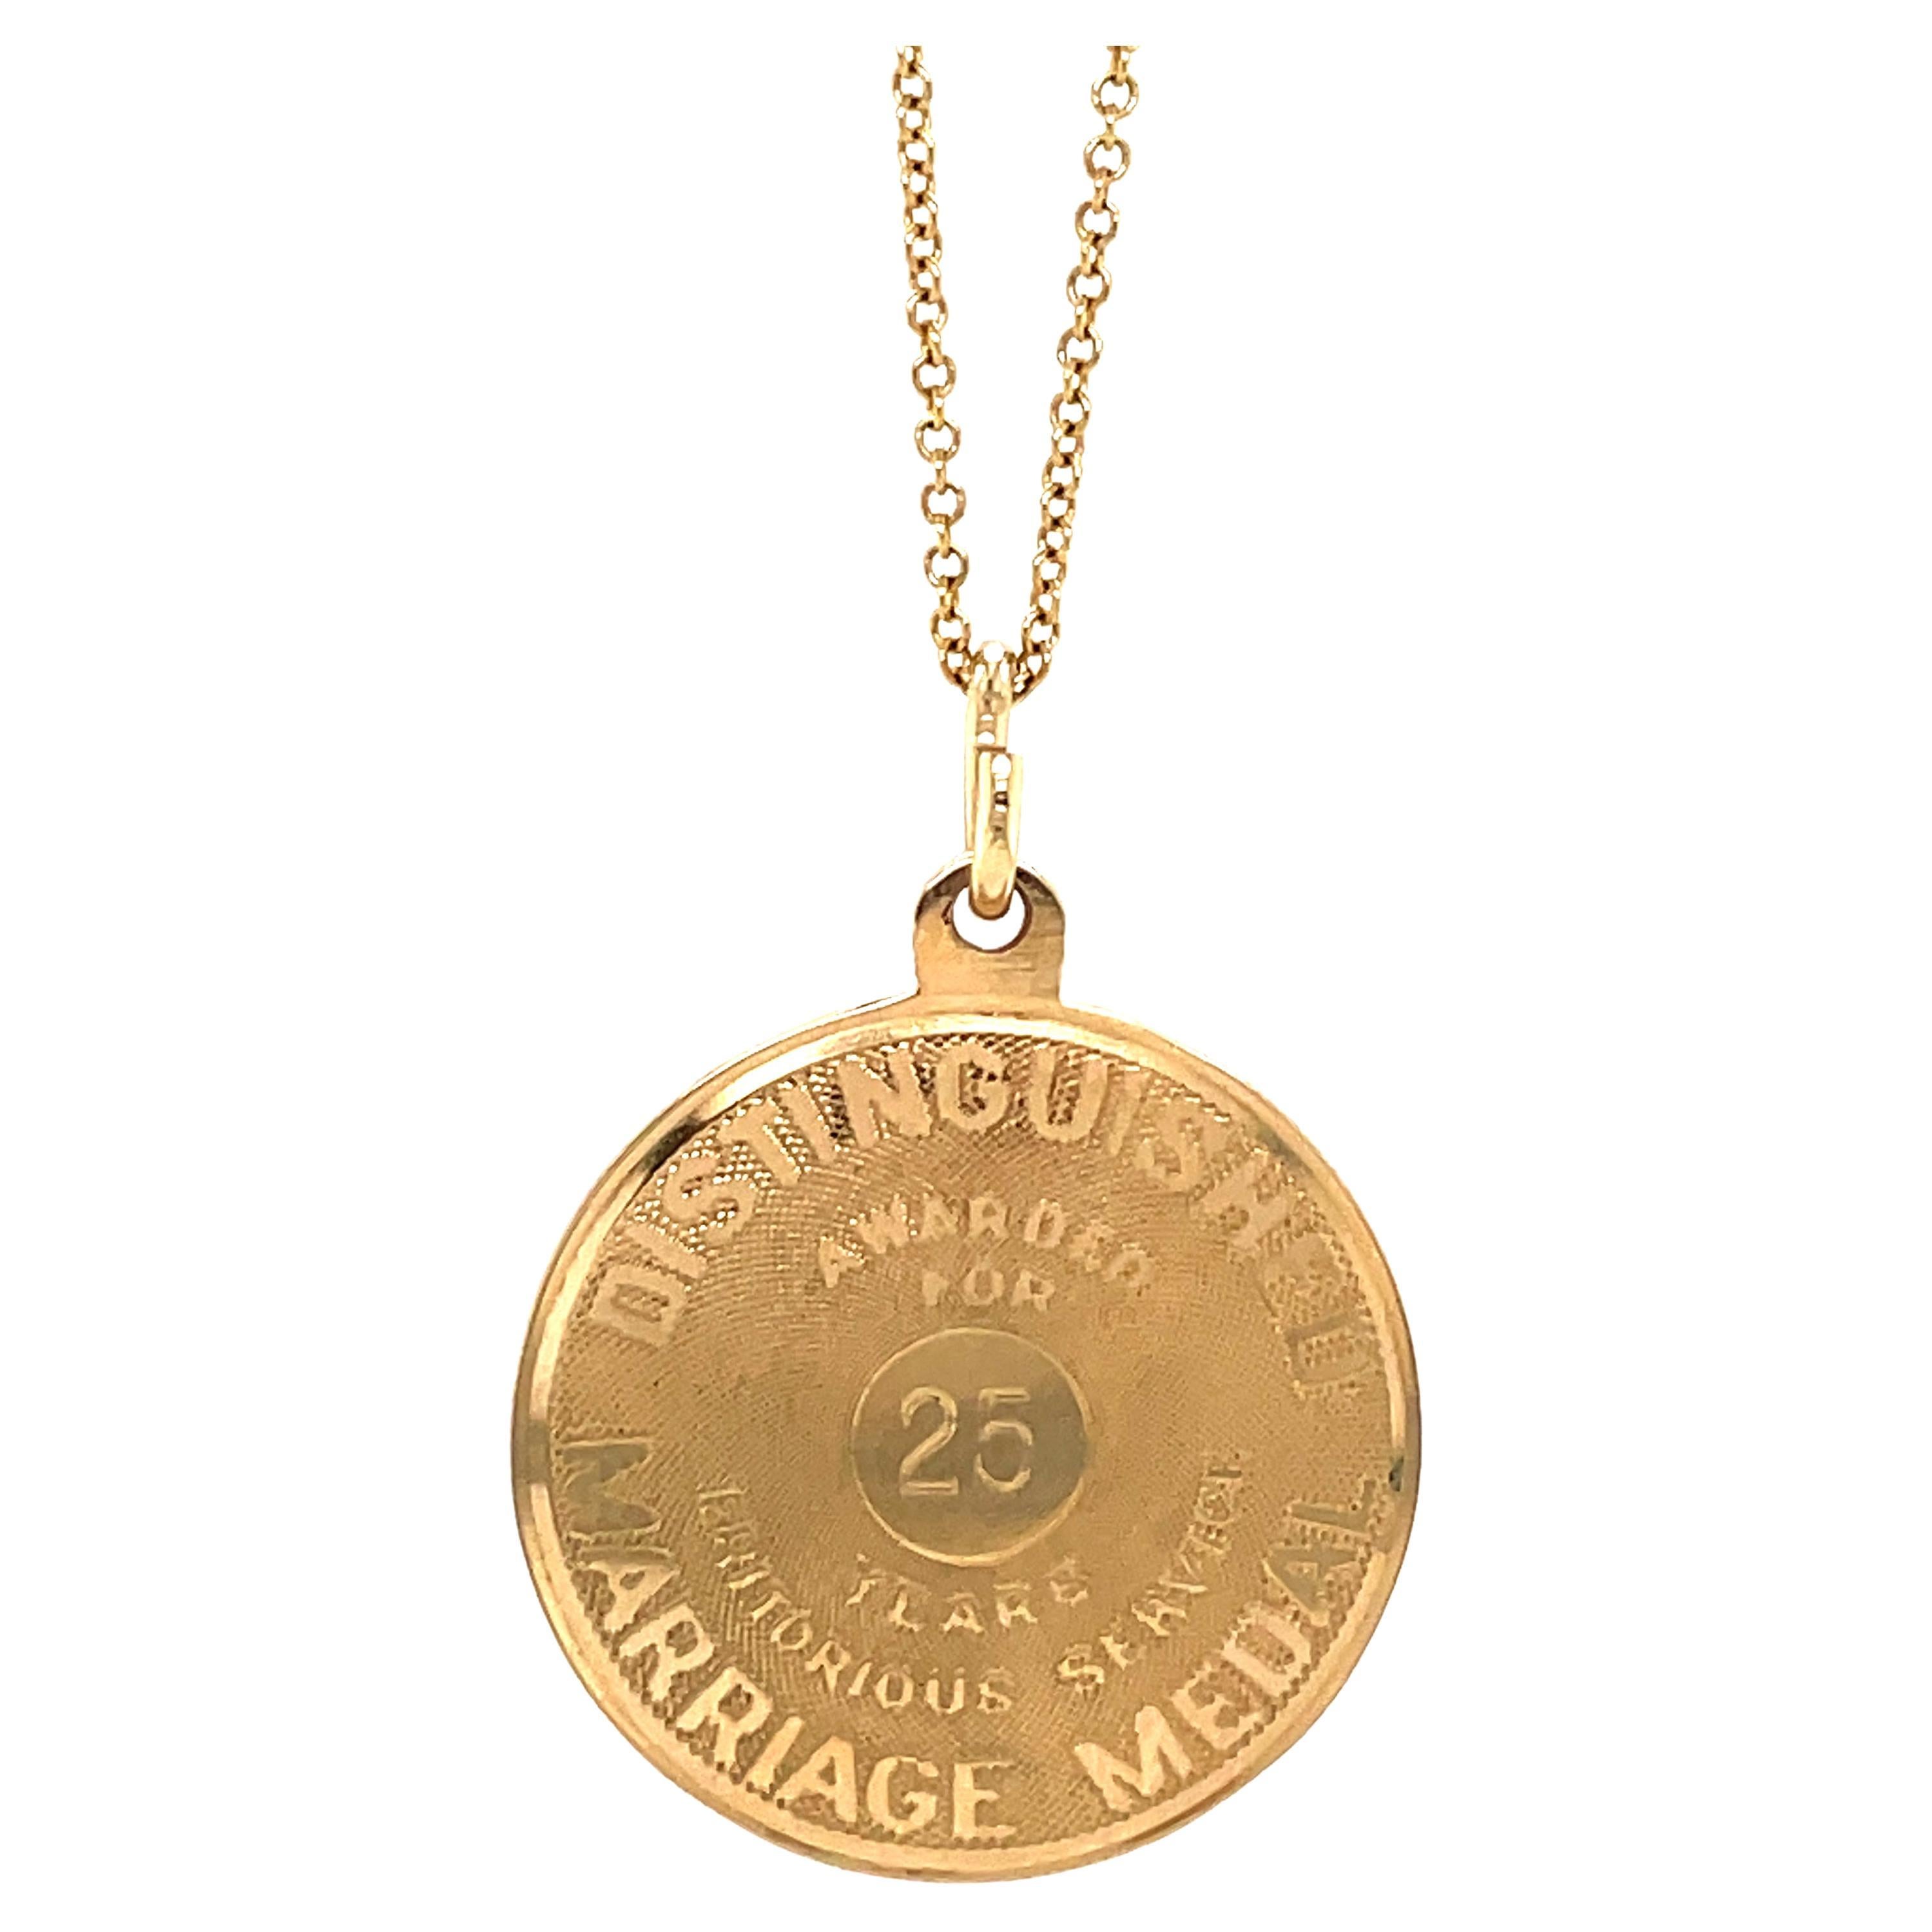 25 Year Marriage Medal Gold Charm For Sale